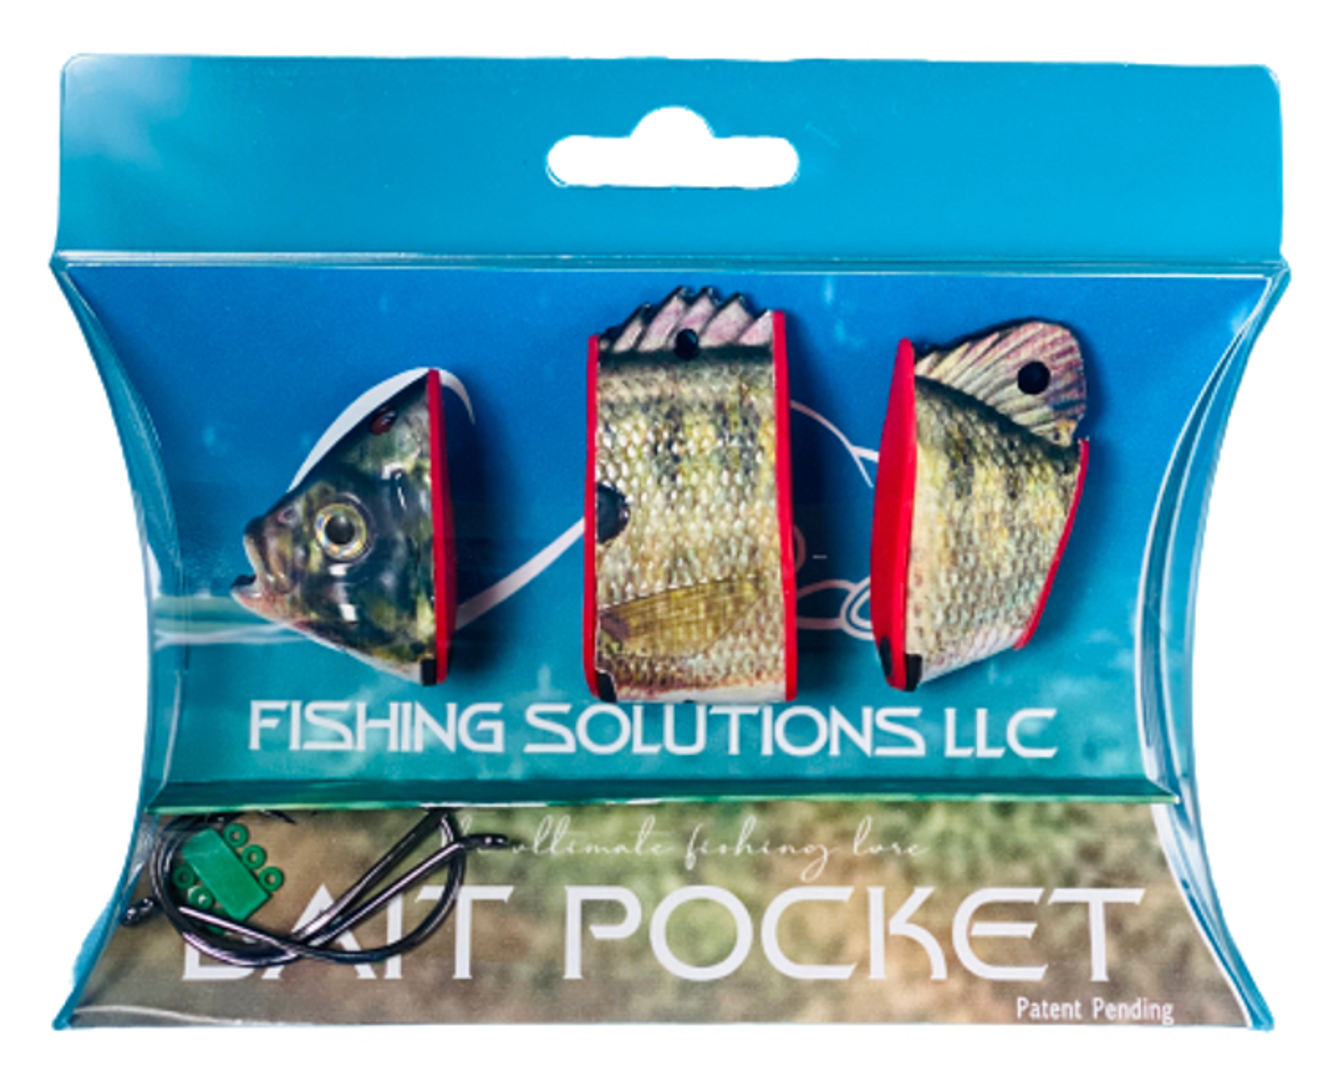 Fishing Solutions A patent-pending lure to hold manufactured bait